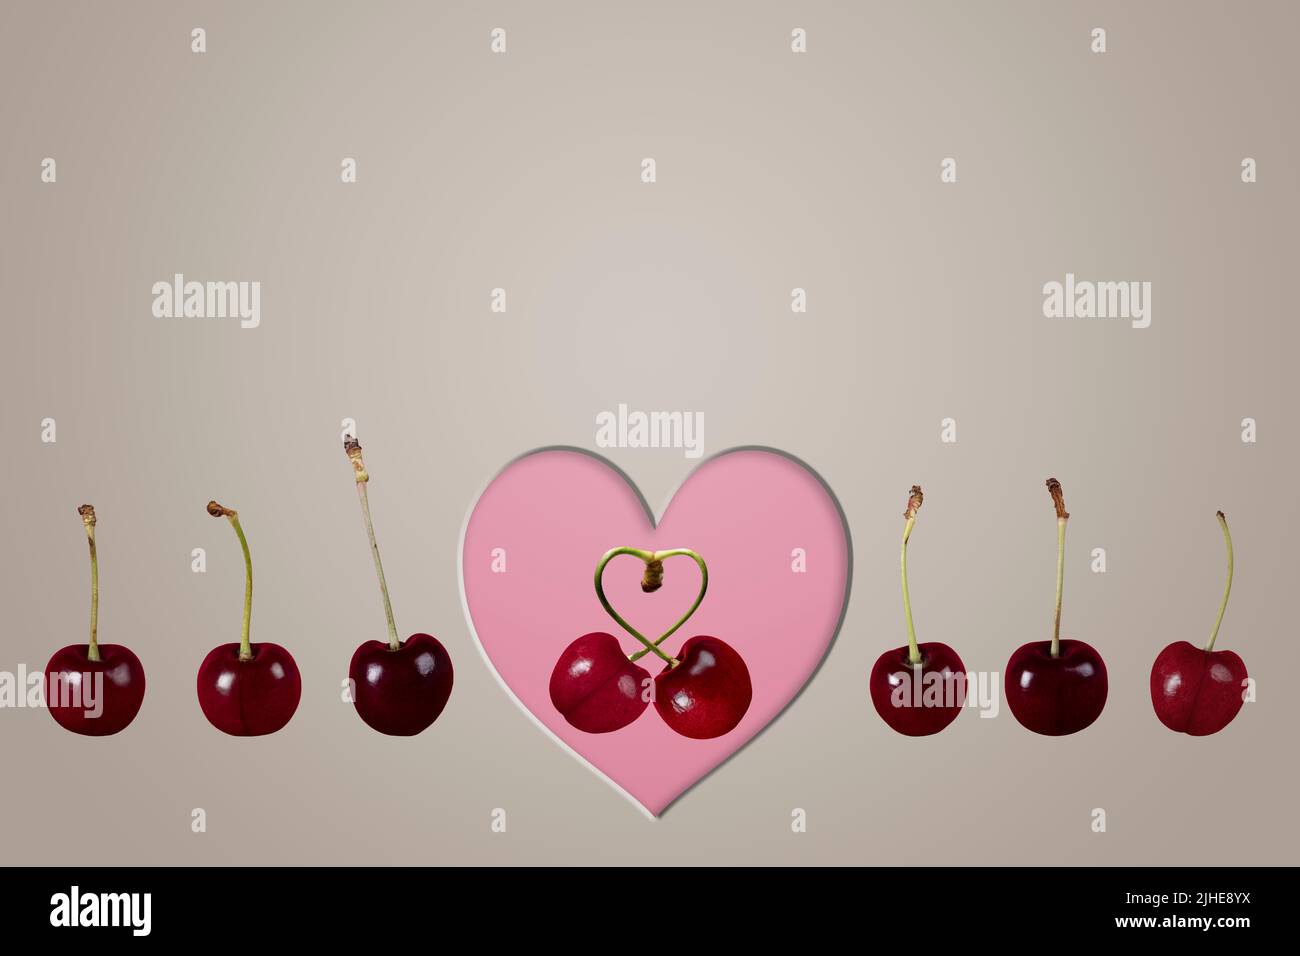 single couple love cherries cherry fruit concept image with row line of cherries & heart on a colorful colourful grey background Stock Photo